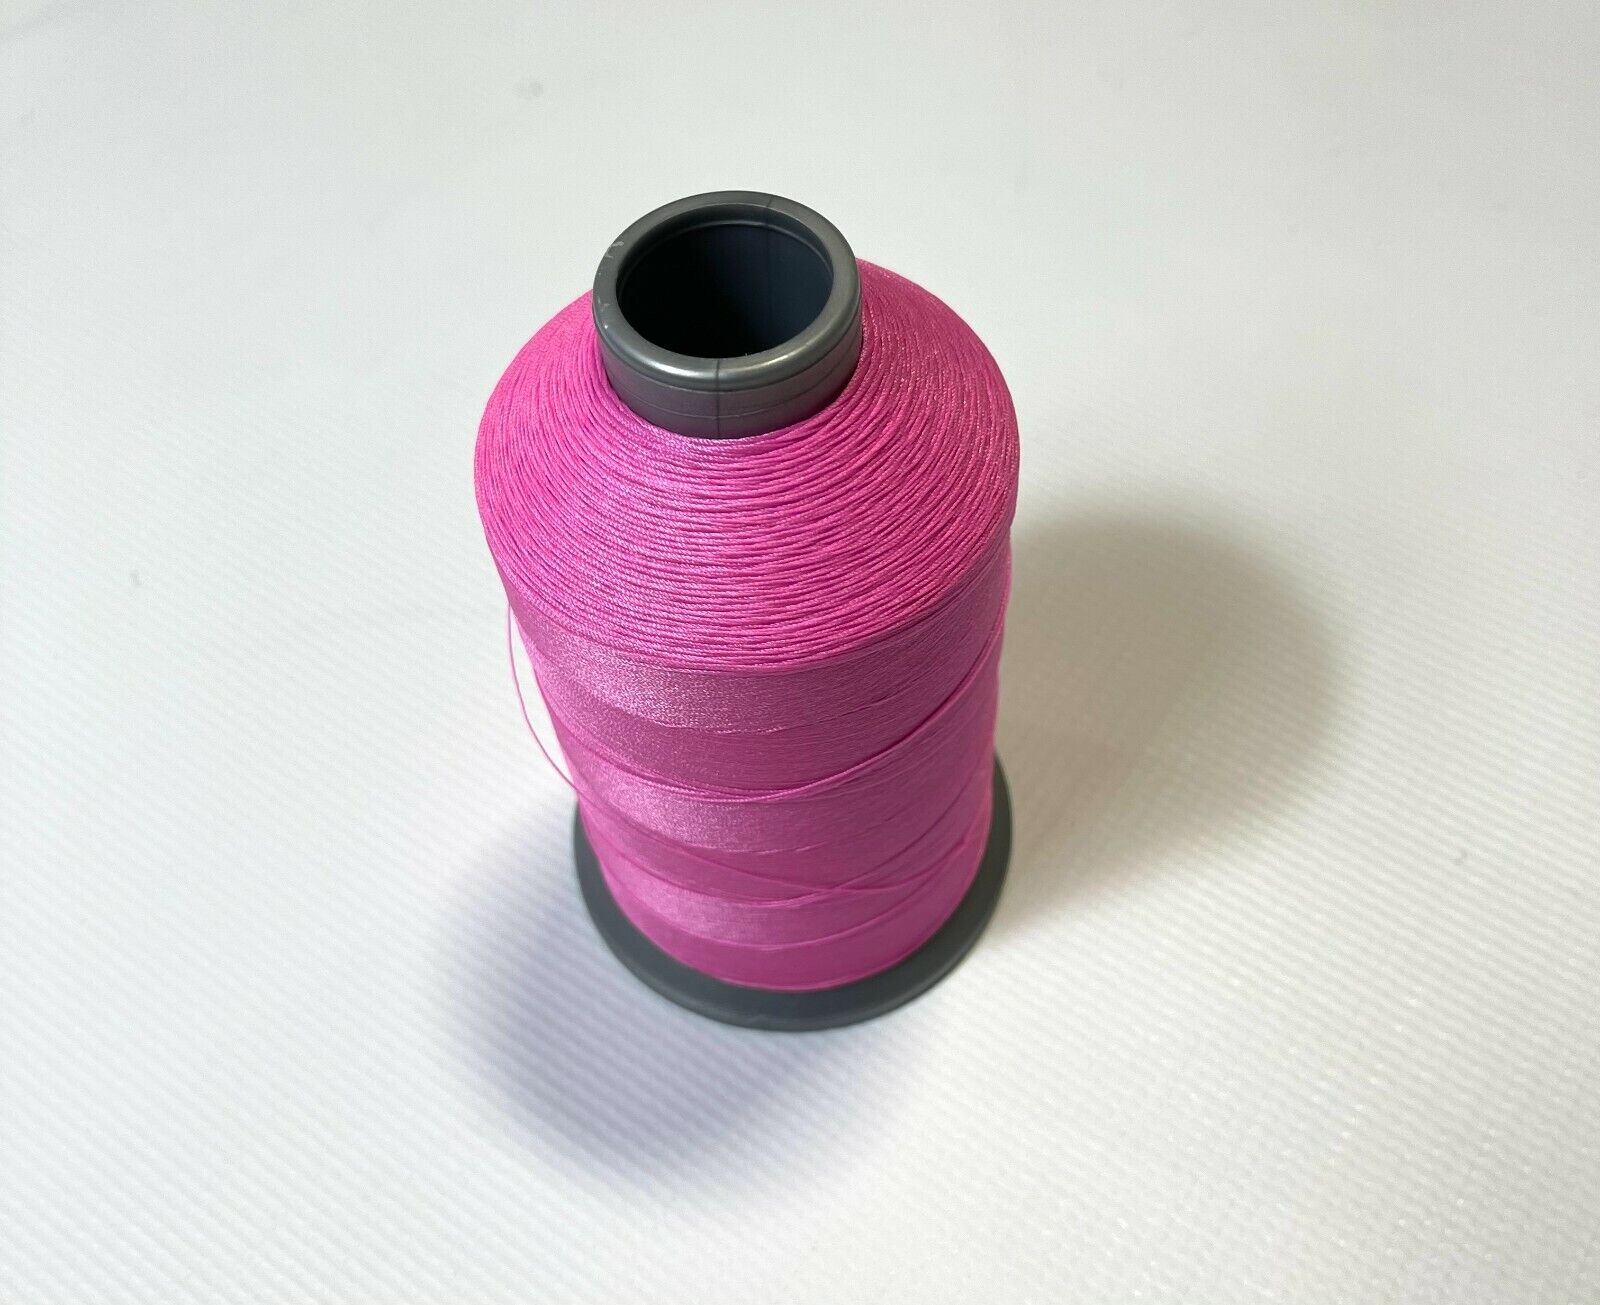 Nylon Sewing Thread Pink Passion One 8oz Spool T70 Bonded 3000 Yards #69 N69